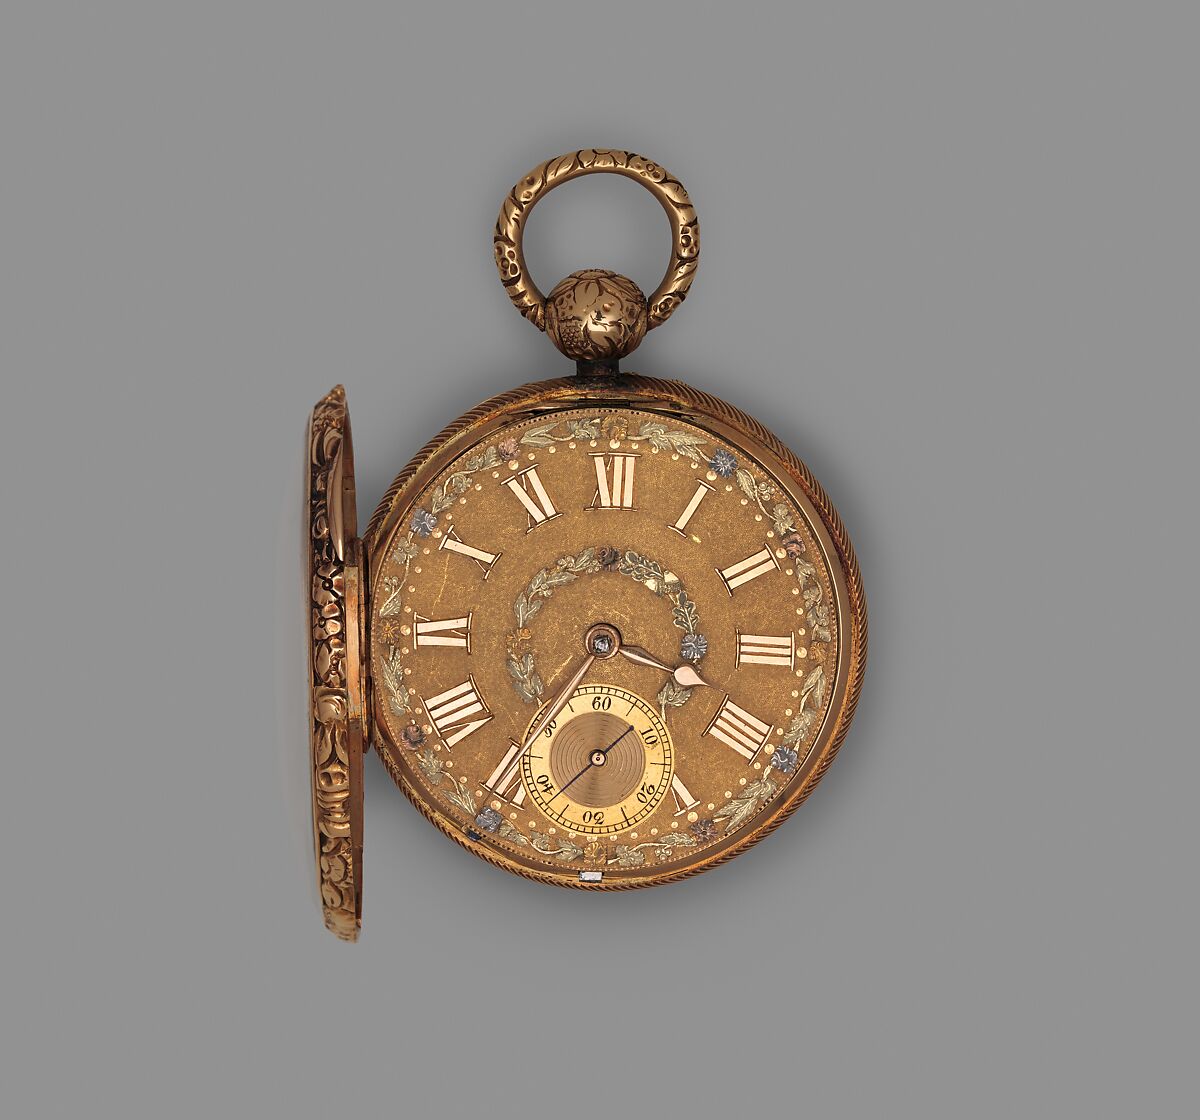 Watch, Watchmaker: Robert Roskell (British, active 1790–1847), Case: gold; Dial: gold with gold and steel hands; Movement: partly gilded brass, partly blued steel, and diamond, British, Liverpool 